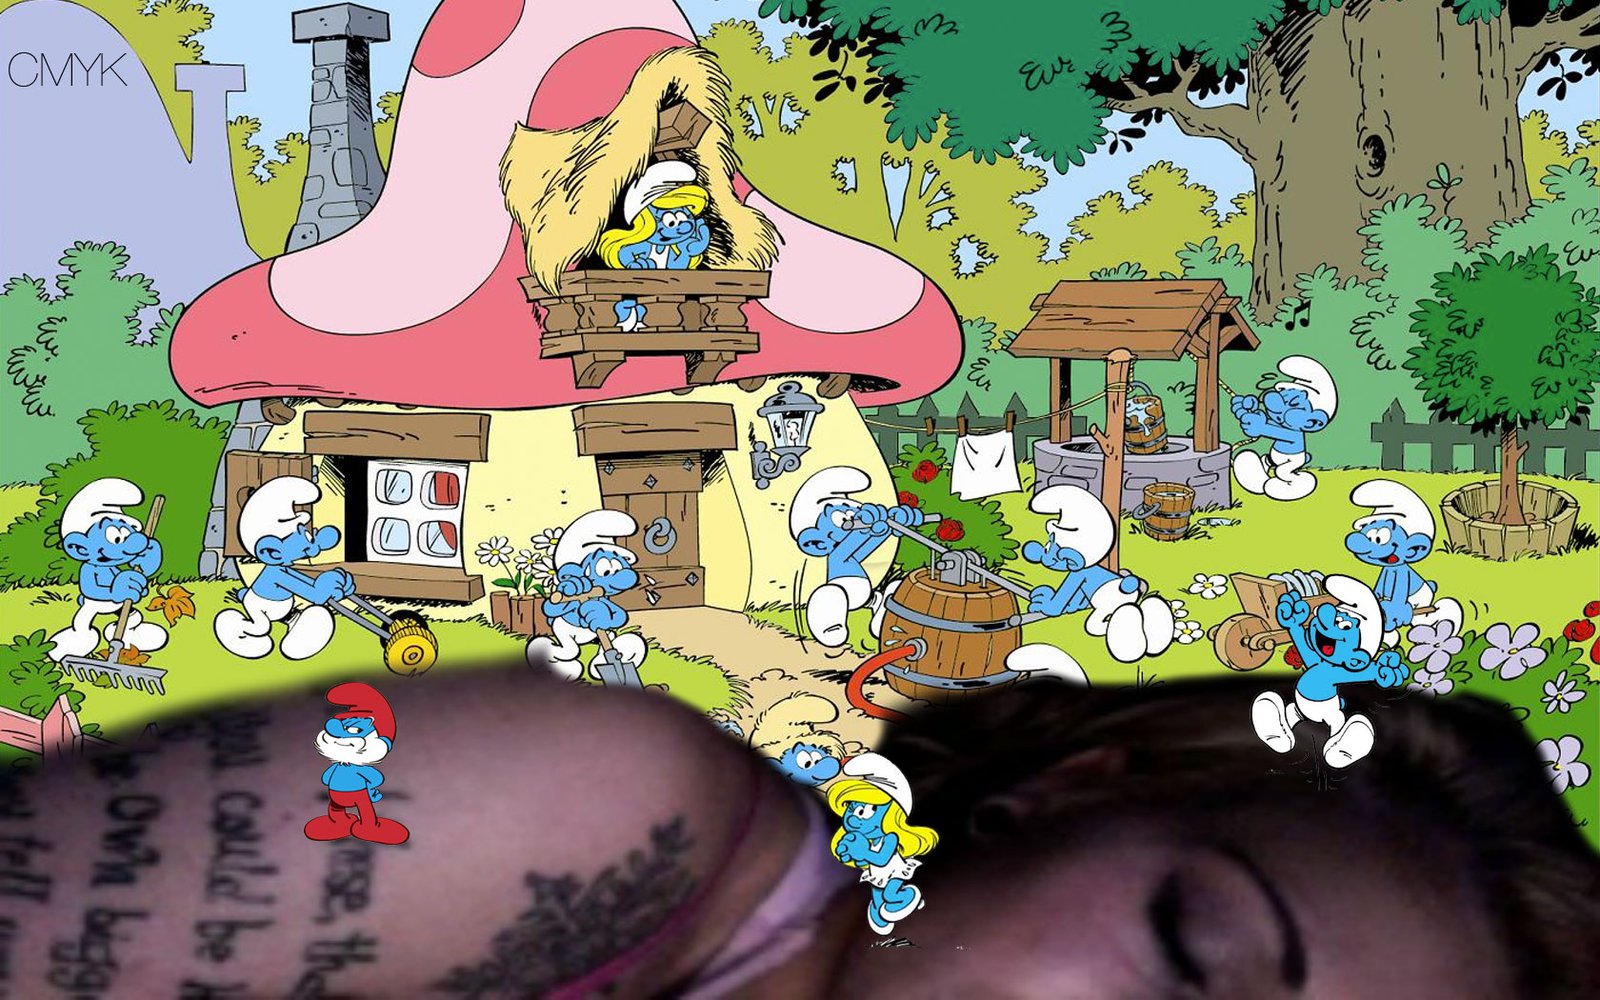 Beezy with tha' smurfs